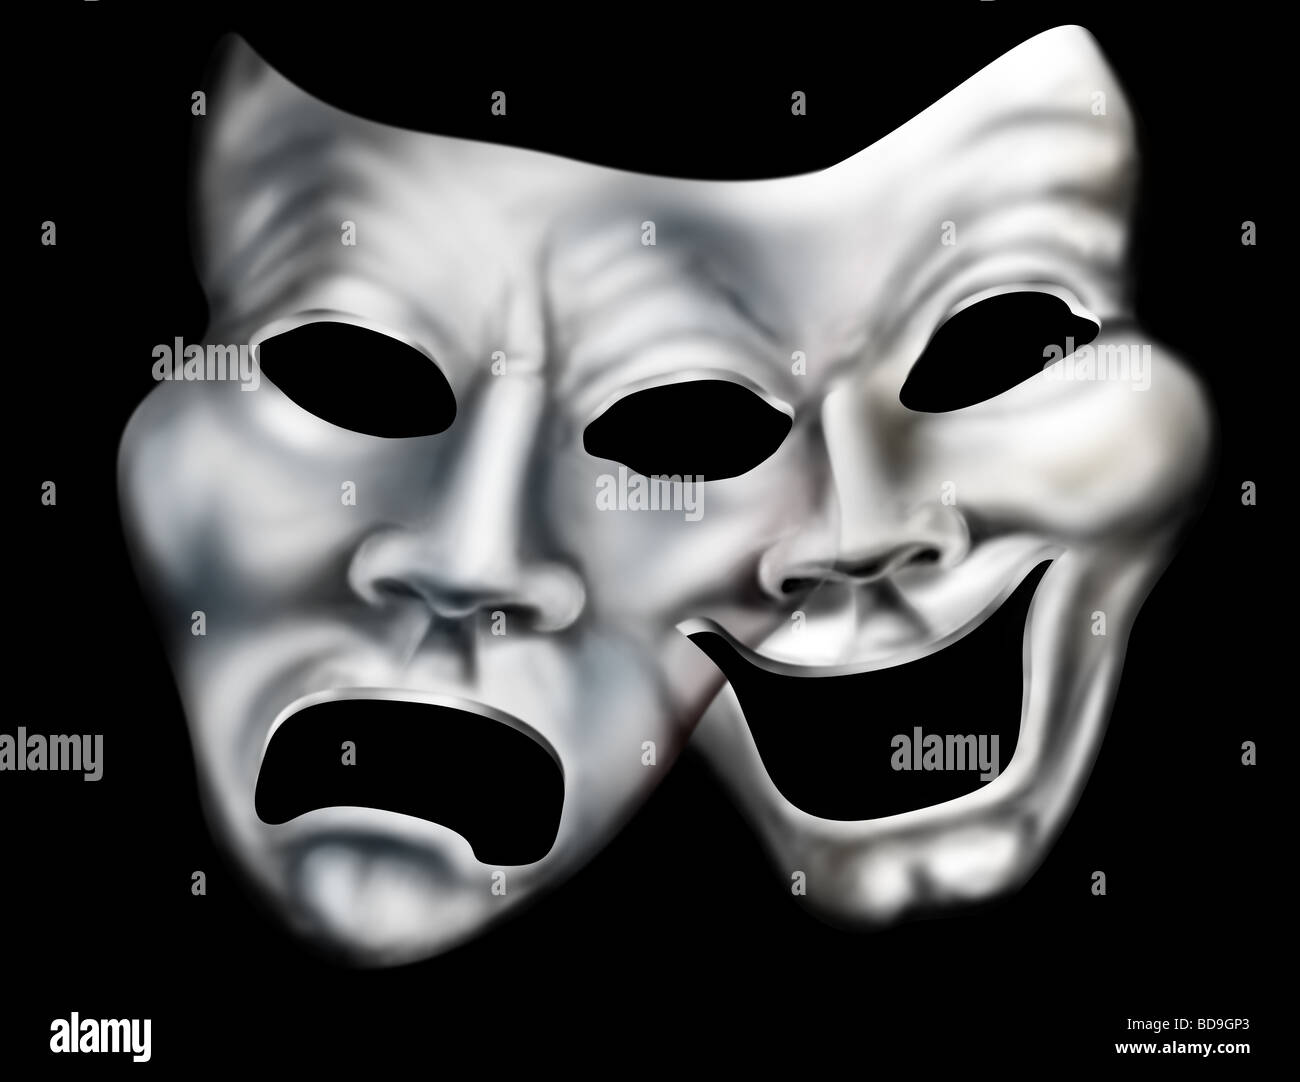 Stylized illustration of two theater masks merged into one Stock Photo